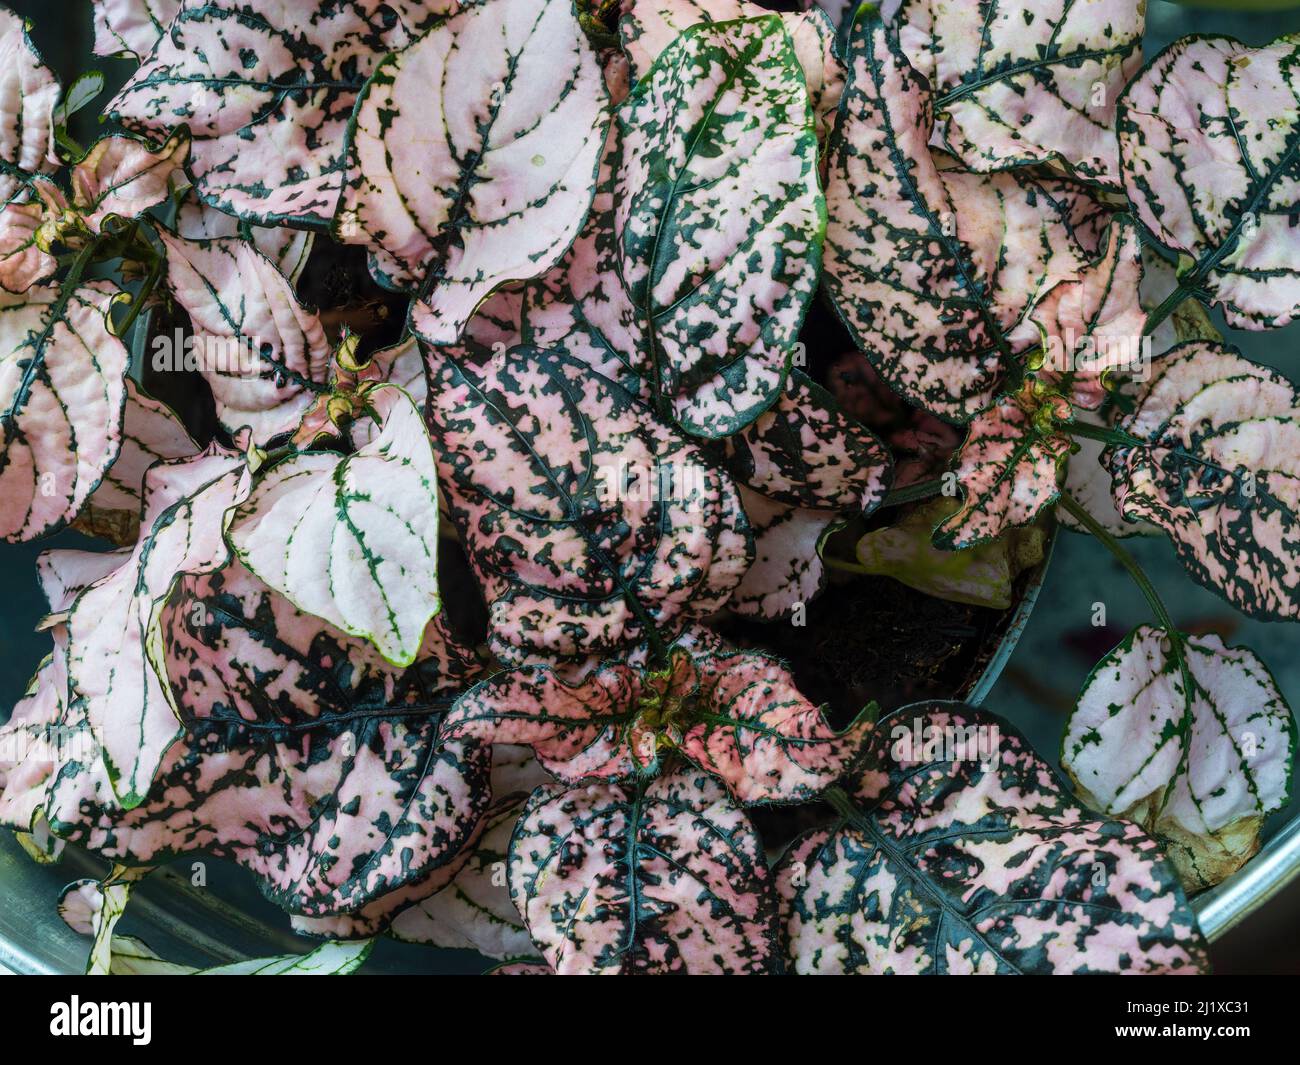 Colourful pink, green and white leaves of the tender houseplant, Hypoestes phyllostachya Pink Splash, Polka Dot Plant Stock Photo